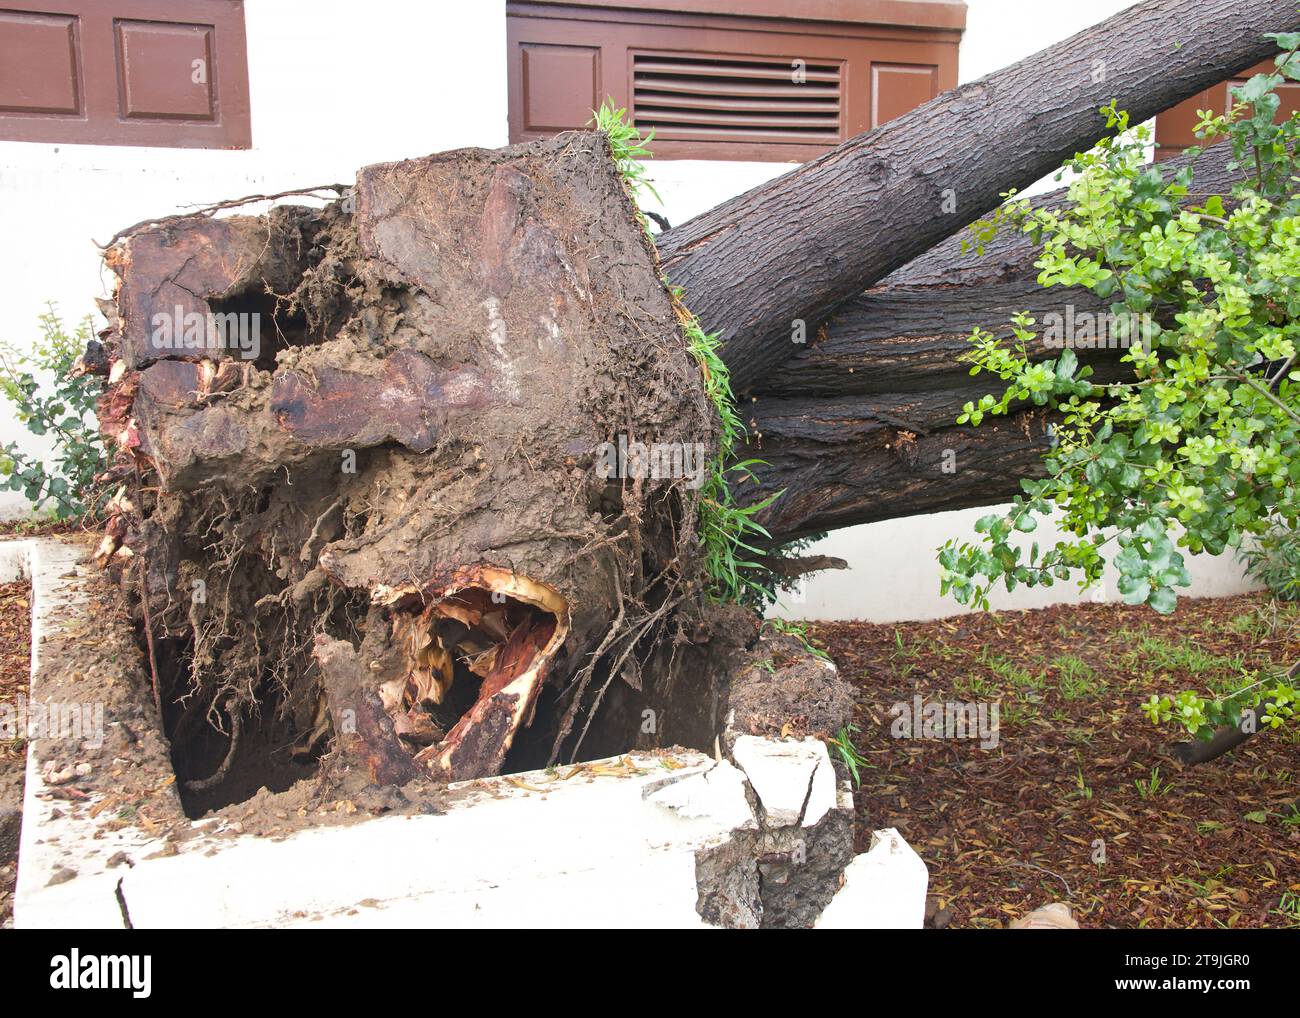 Storm damage after 70 mph wind with rain hit the Bay Area overnight in California. Tree planted in concrete planter, rootbound and weakened by years o Stock Photo